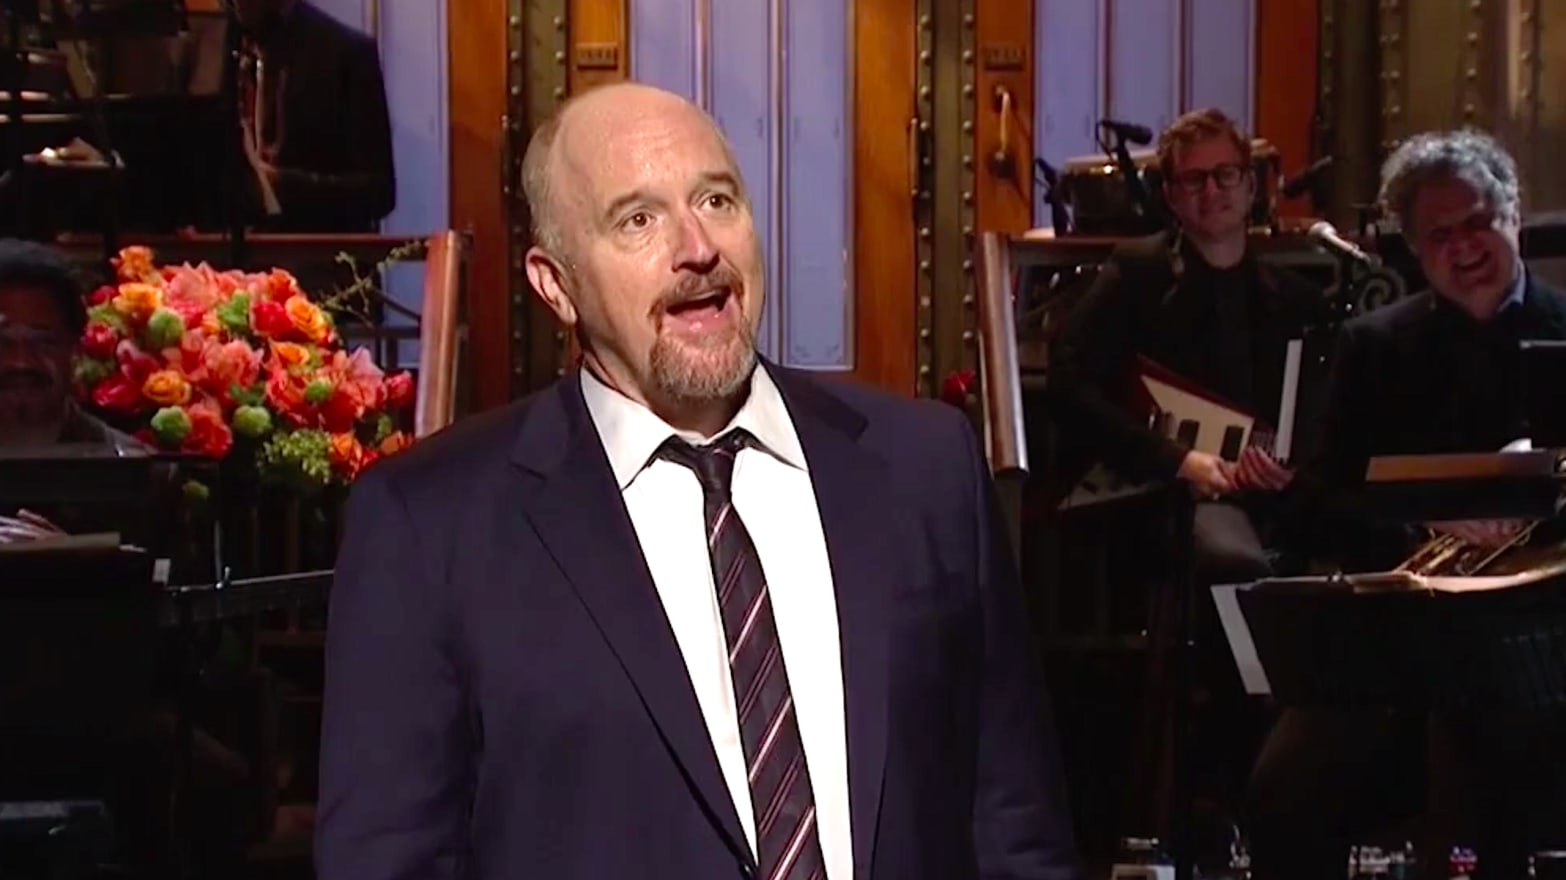 Louis C.K. Skewers His Own White Privilege in Hilarious SNL Monologue